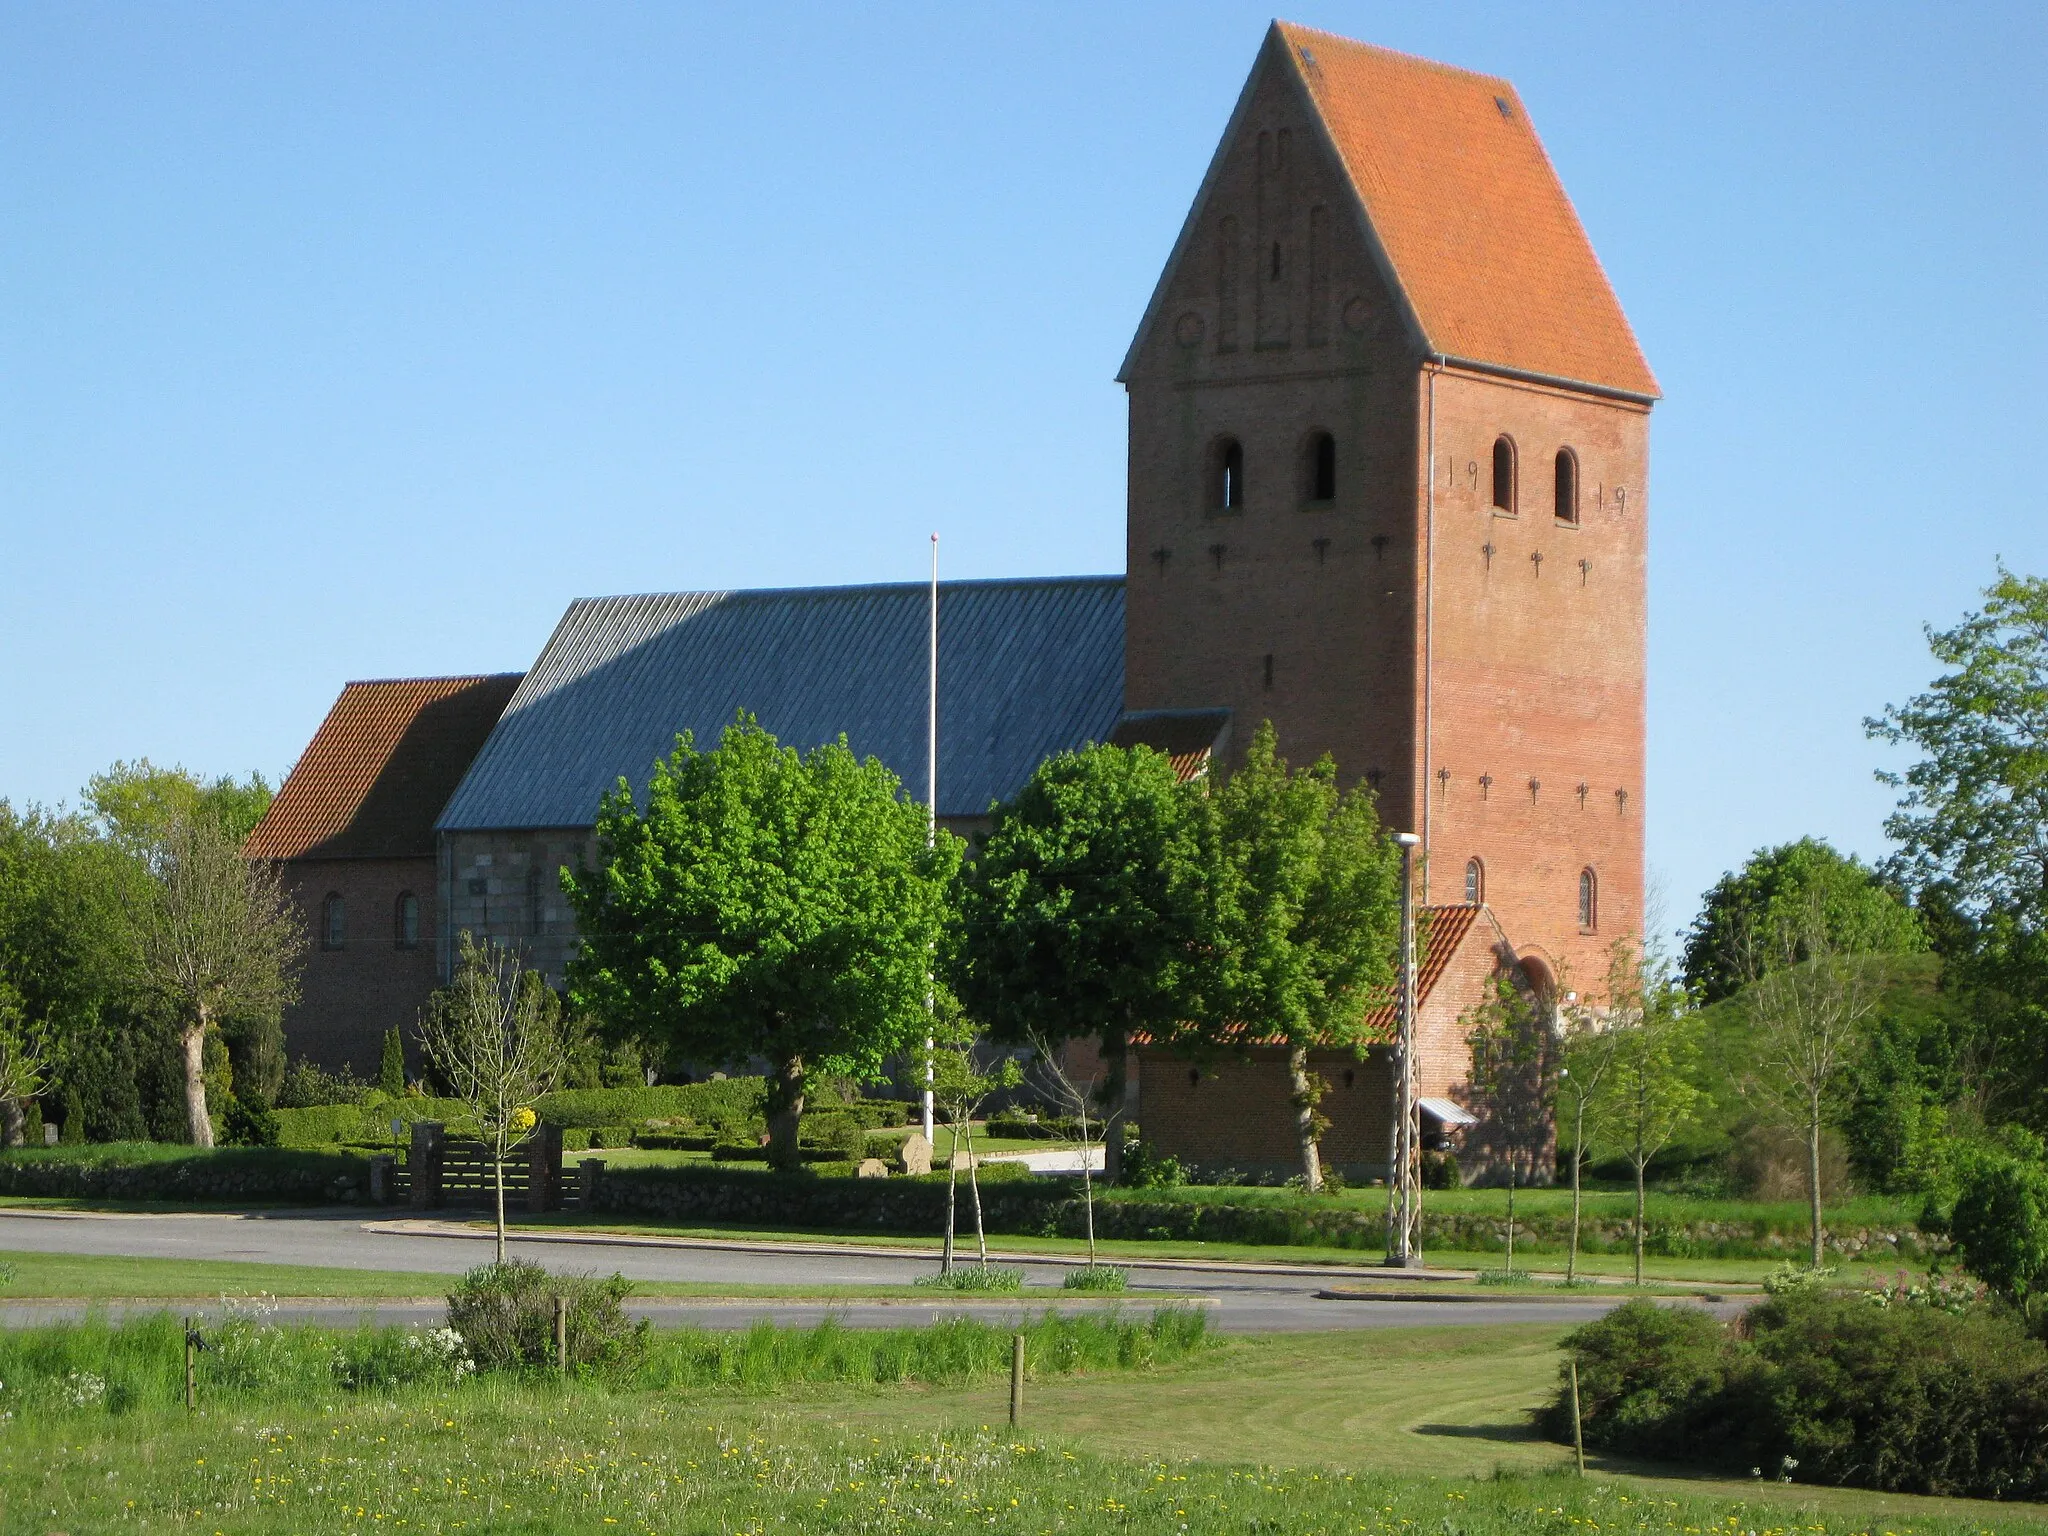 Photo showing: The church "Vamdrup Kirke" in the small town "Vamdrup". The town is located in Kolding Kommune, South-Central Jutland, Denmark.